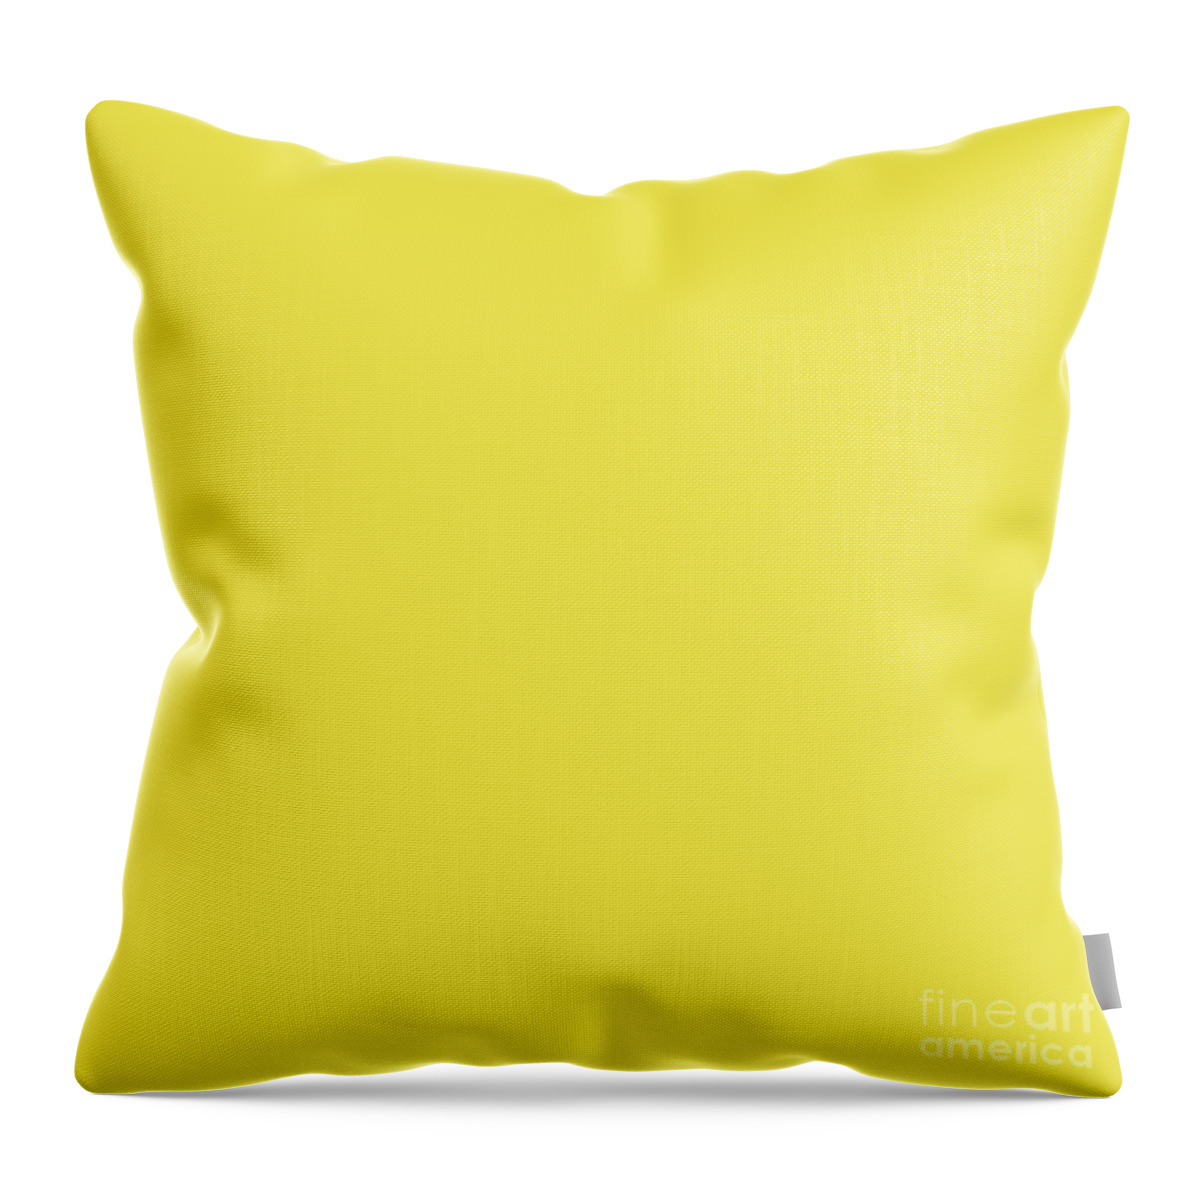 Andee Design Abstract Throw Pillow featuring the digital art Lemonade by Andee Design